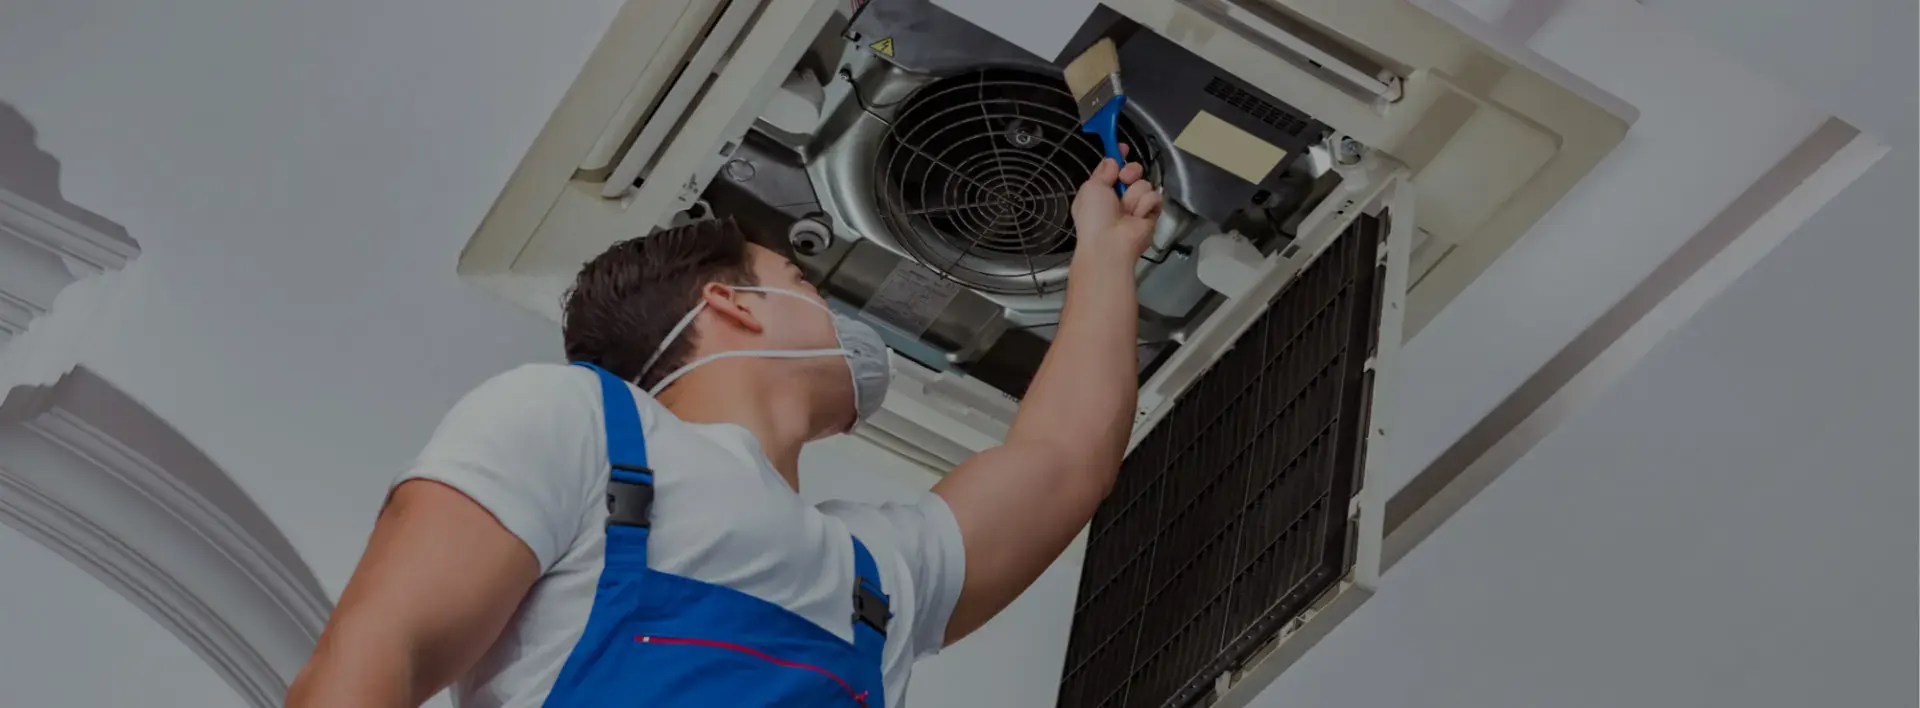 technician cleaning an AC unit